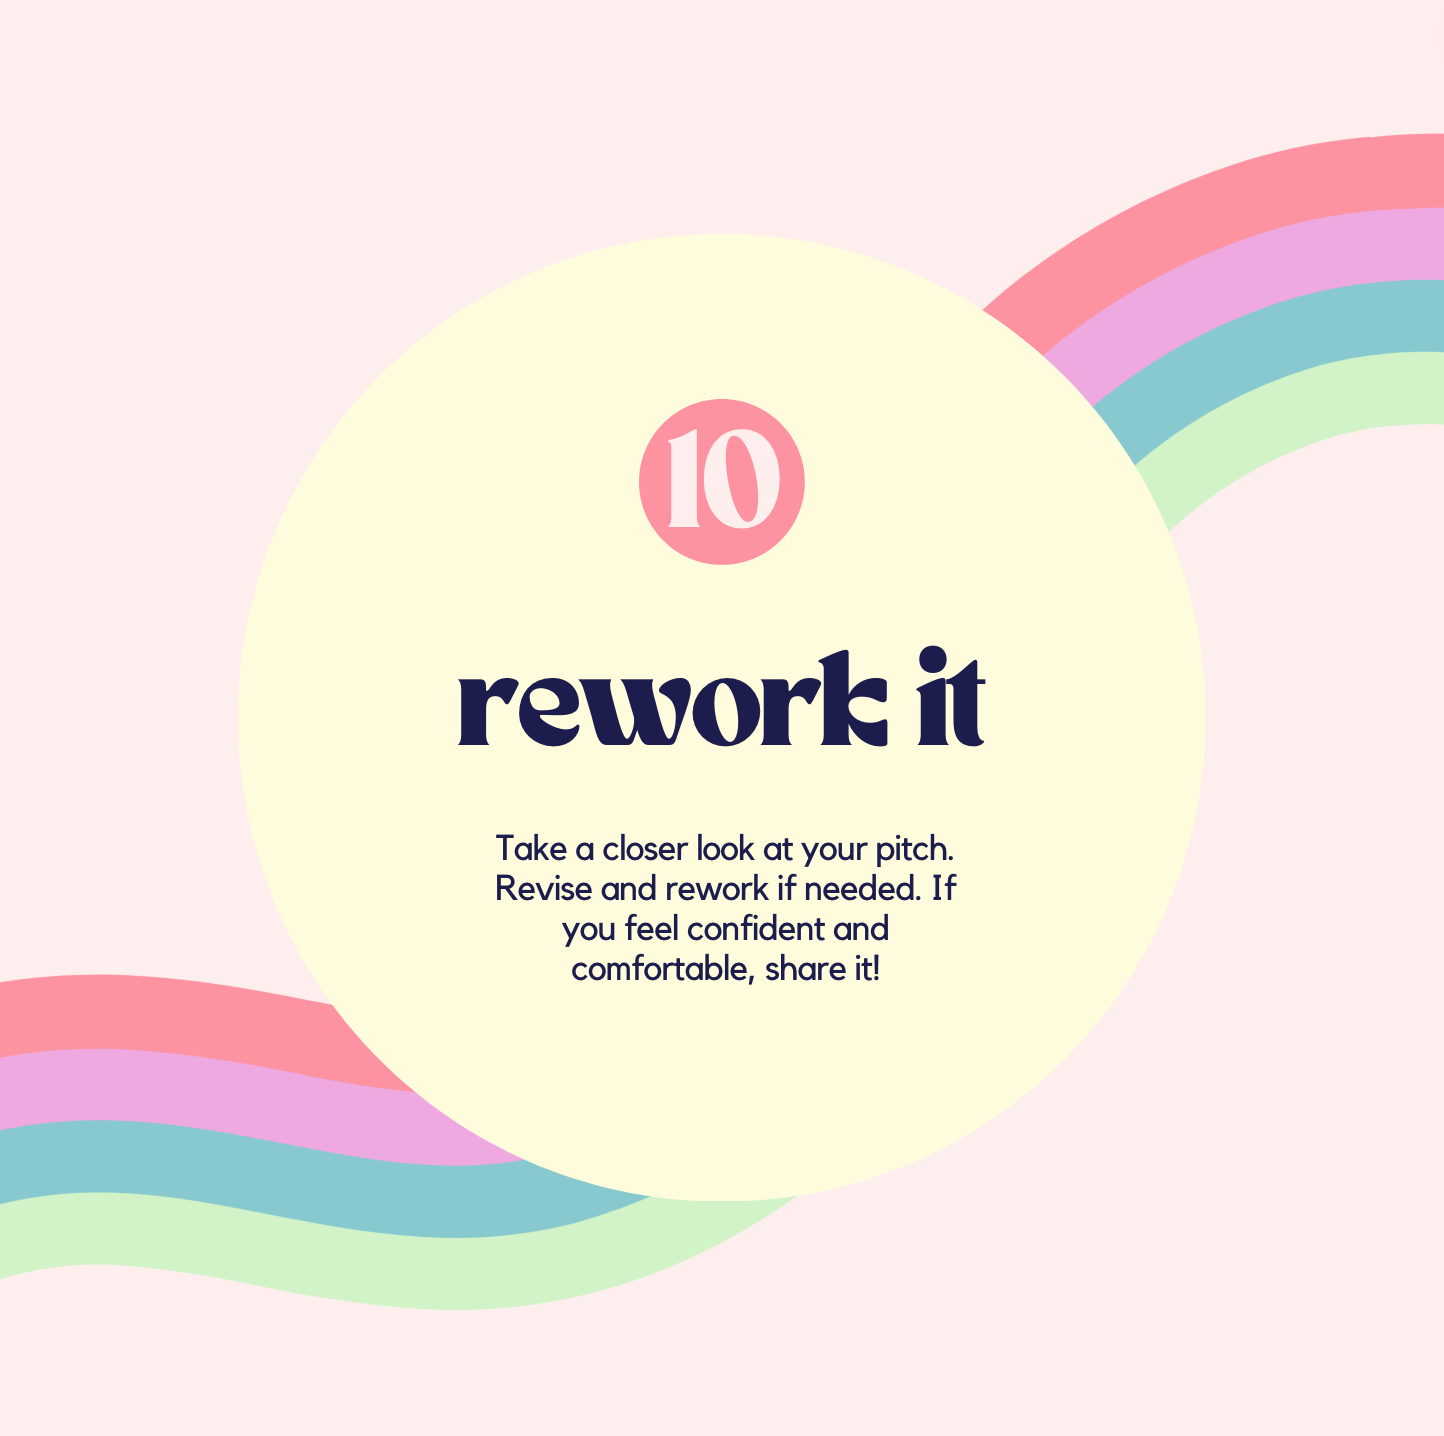 Rework it. Take a closer look at your pitch. Revise and rework if needed. If you feel confident and comfortable, share it!